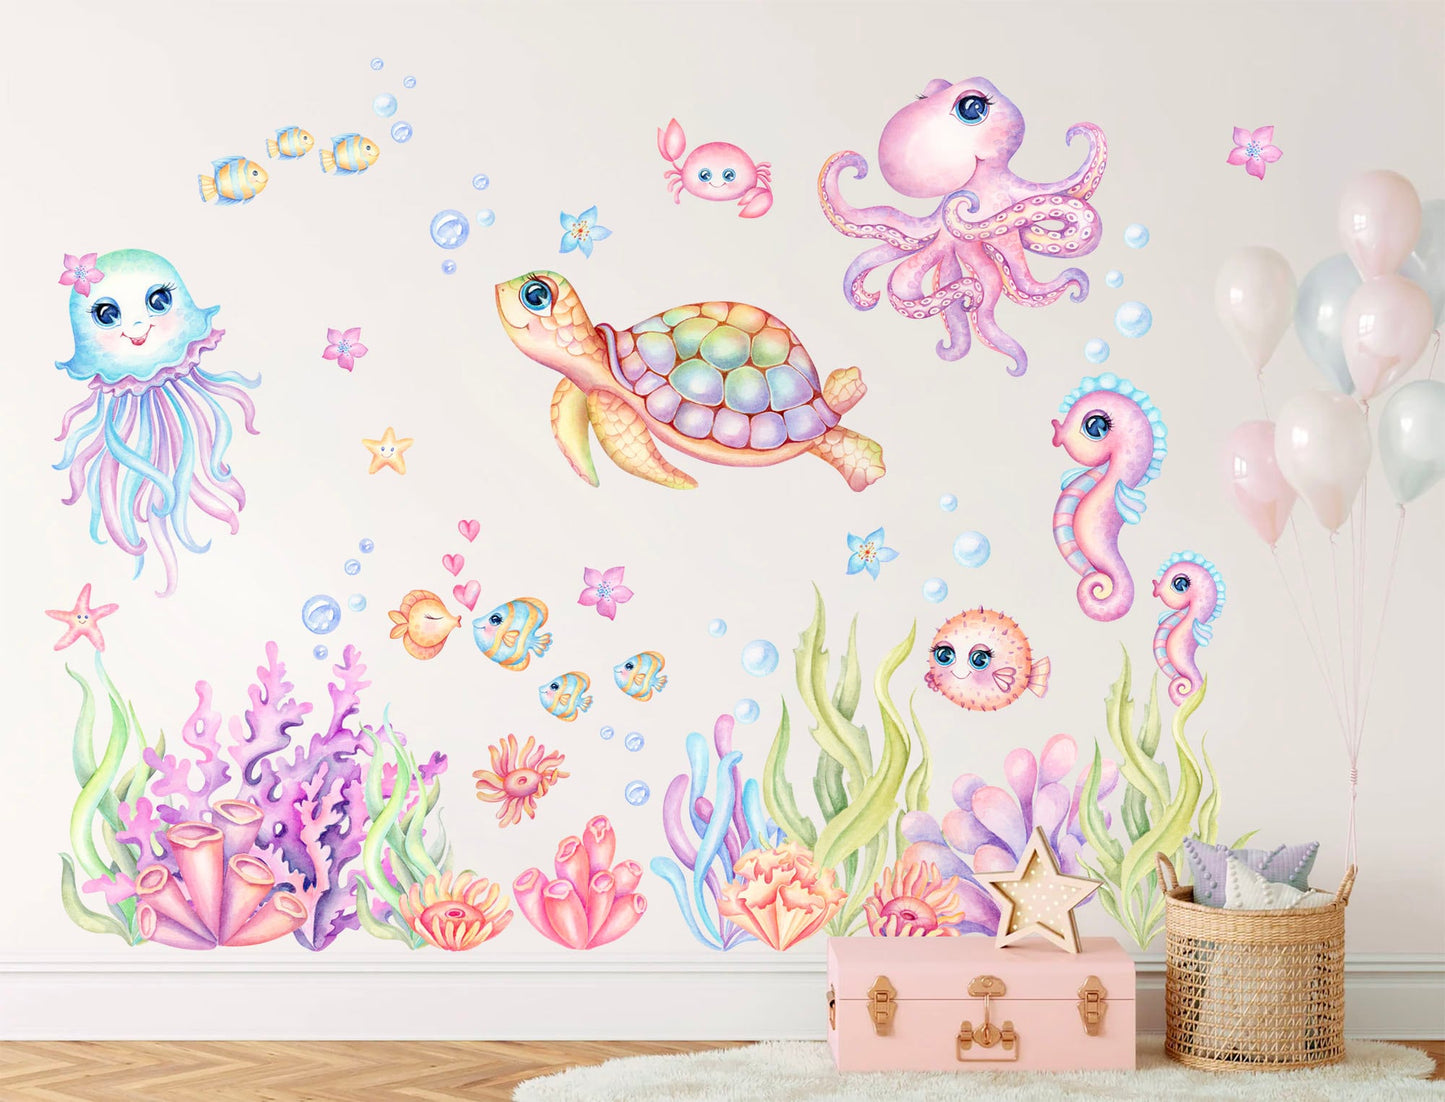 Pink and Blue Underwater World Cartoon Wall Decal - Happy Marine Life for Girls' Room - BR308